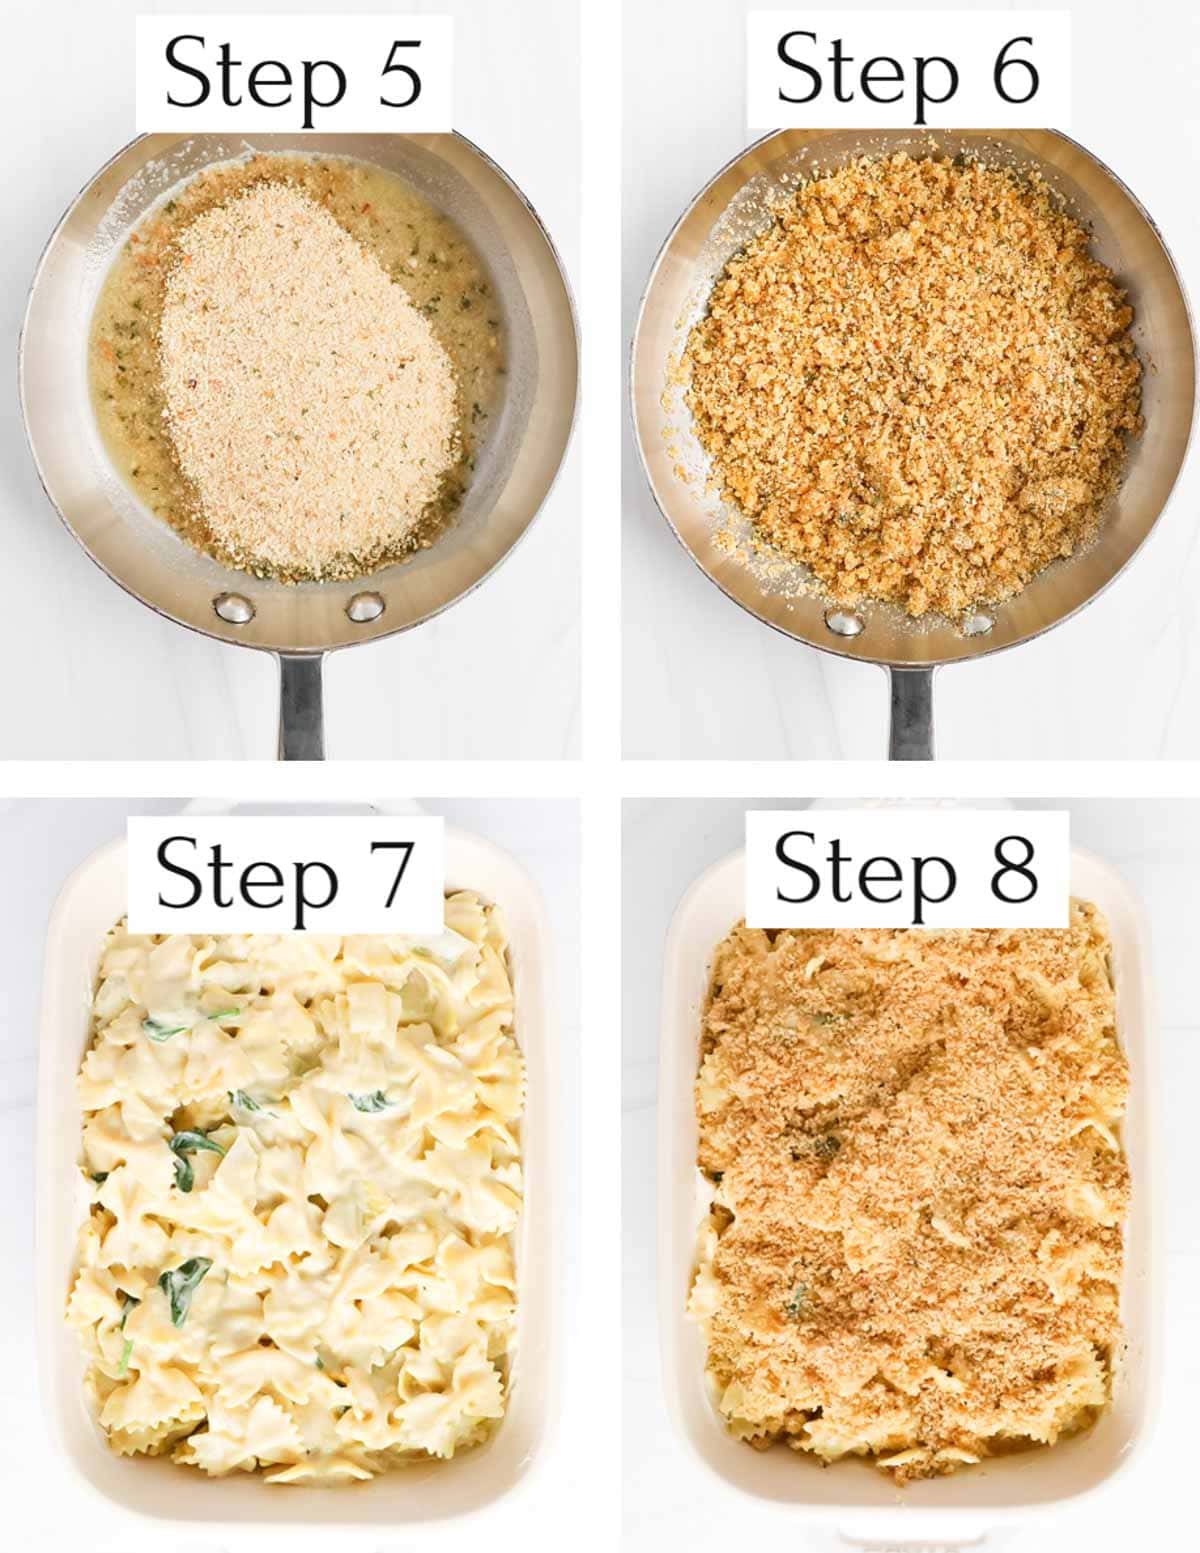 4 step by step images including: step 5: a pan filled with uncooked breadcrumbs and melted butter, step 6: a pan filled with toasted bread crumbs, step 7: pasta inside a white baking dish, step 8: the pasta is topped with the bread crumbs.